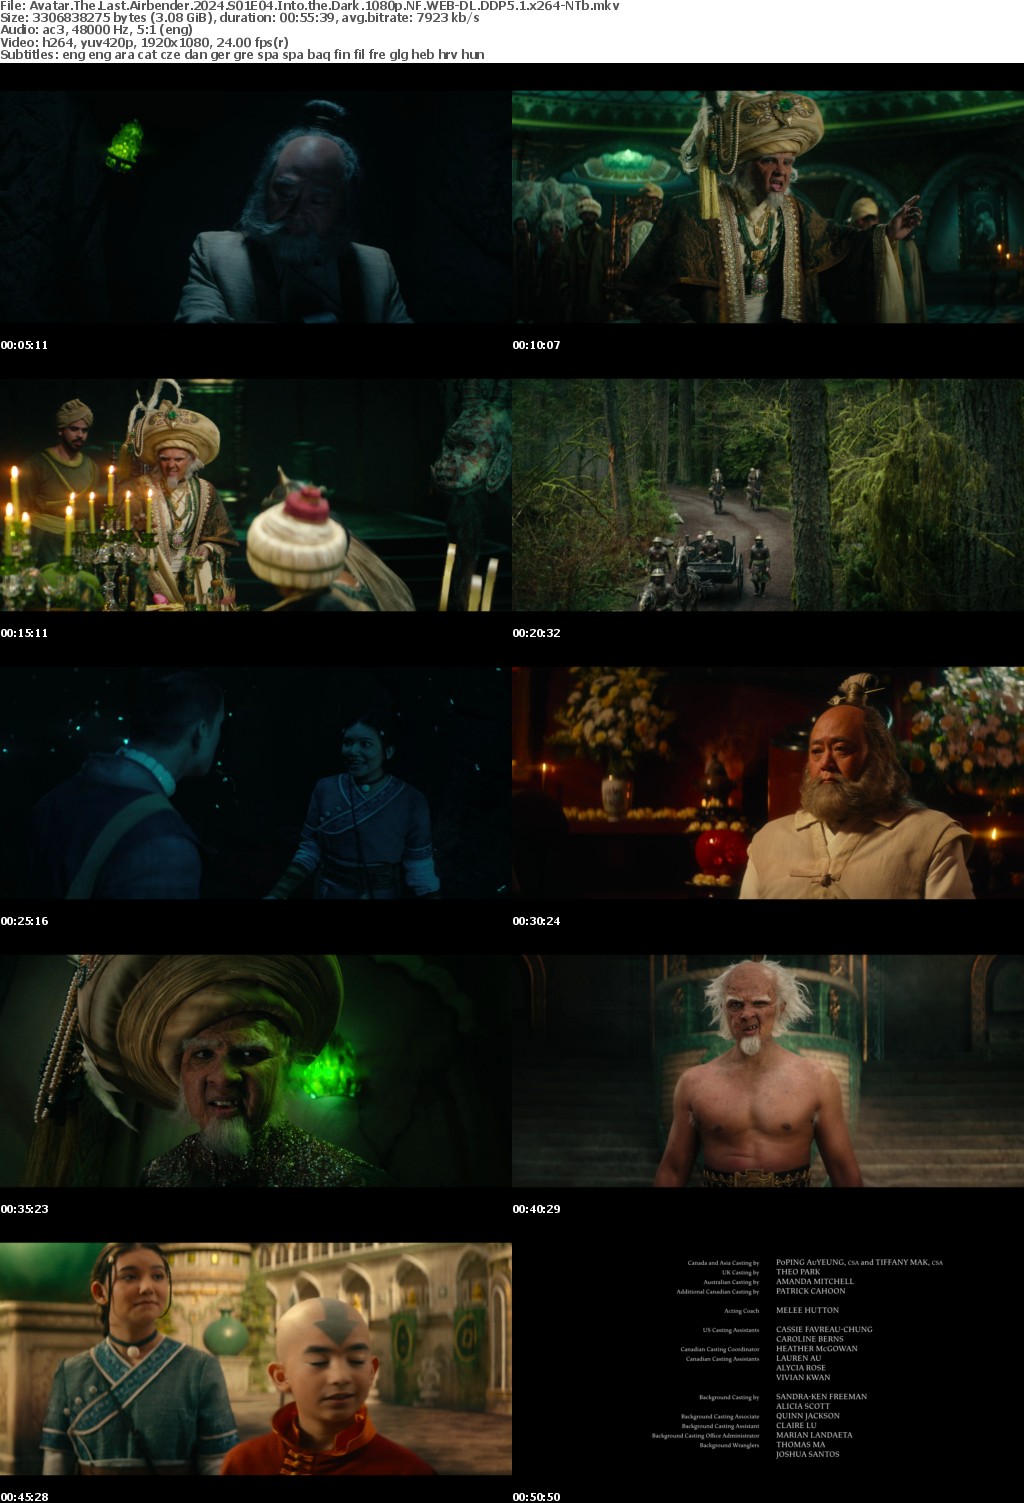 Avatar The Last Airbender 2024 S01E04 Into the Dark 1080p NF WEB-DL DDP5 1 x264-NTb